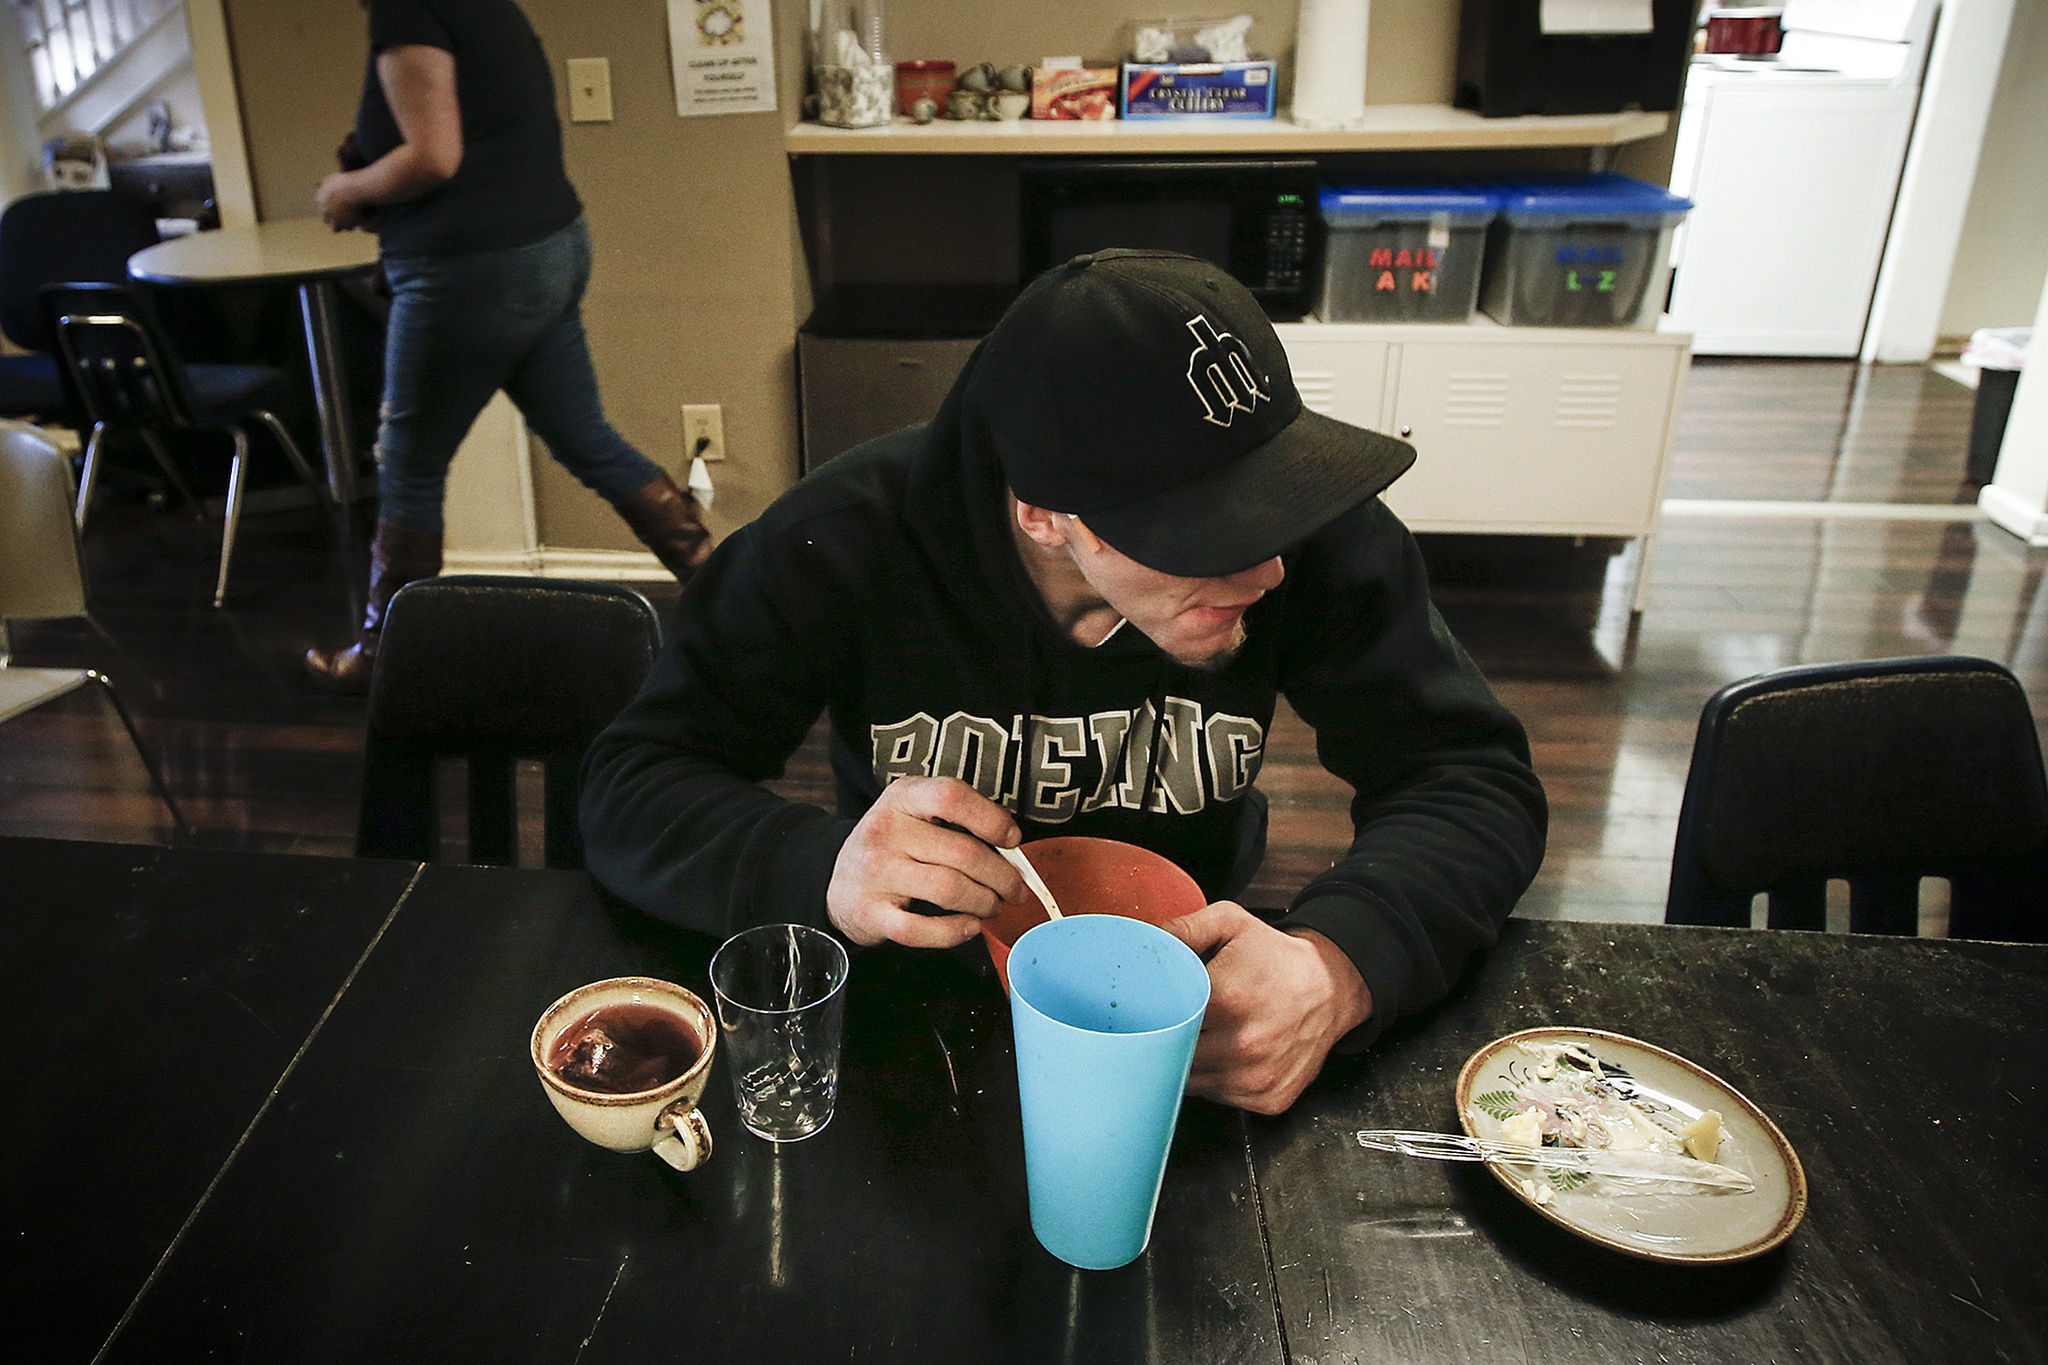 A visitor to Cocoon House’s U-Turn drop-in center on Broadway in Everett eats a warm meal on Tuesday, Dec. 13. The nonprofit that provides shelter and other services to at-risk youth is planning a major expansion and is slated to move into a new building on Colby Avenue by mid-2018. (Ian Terry / The Herald)